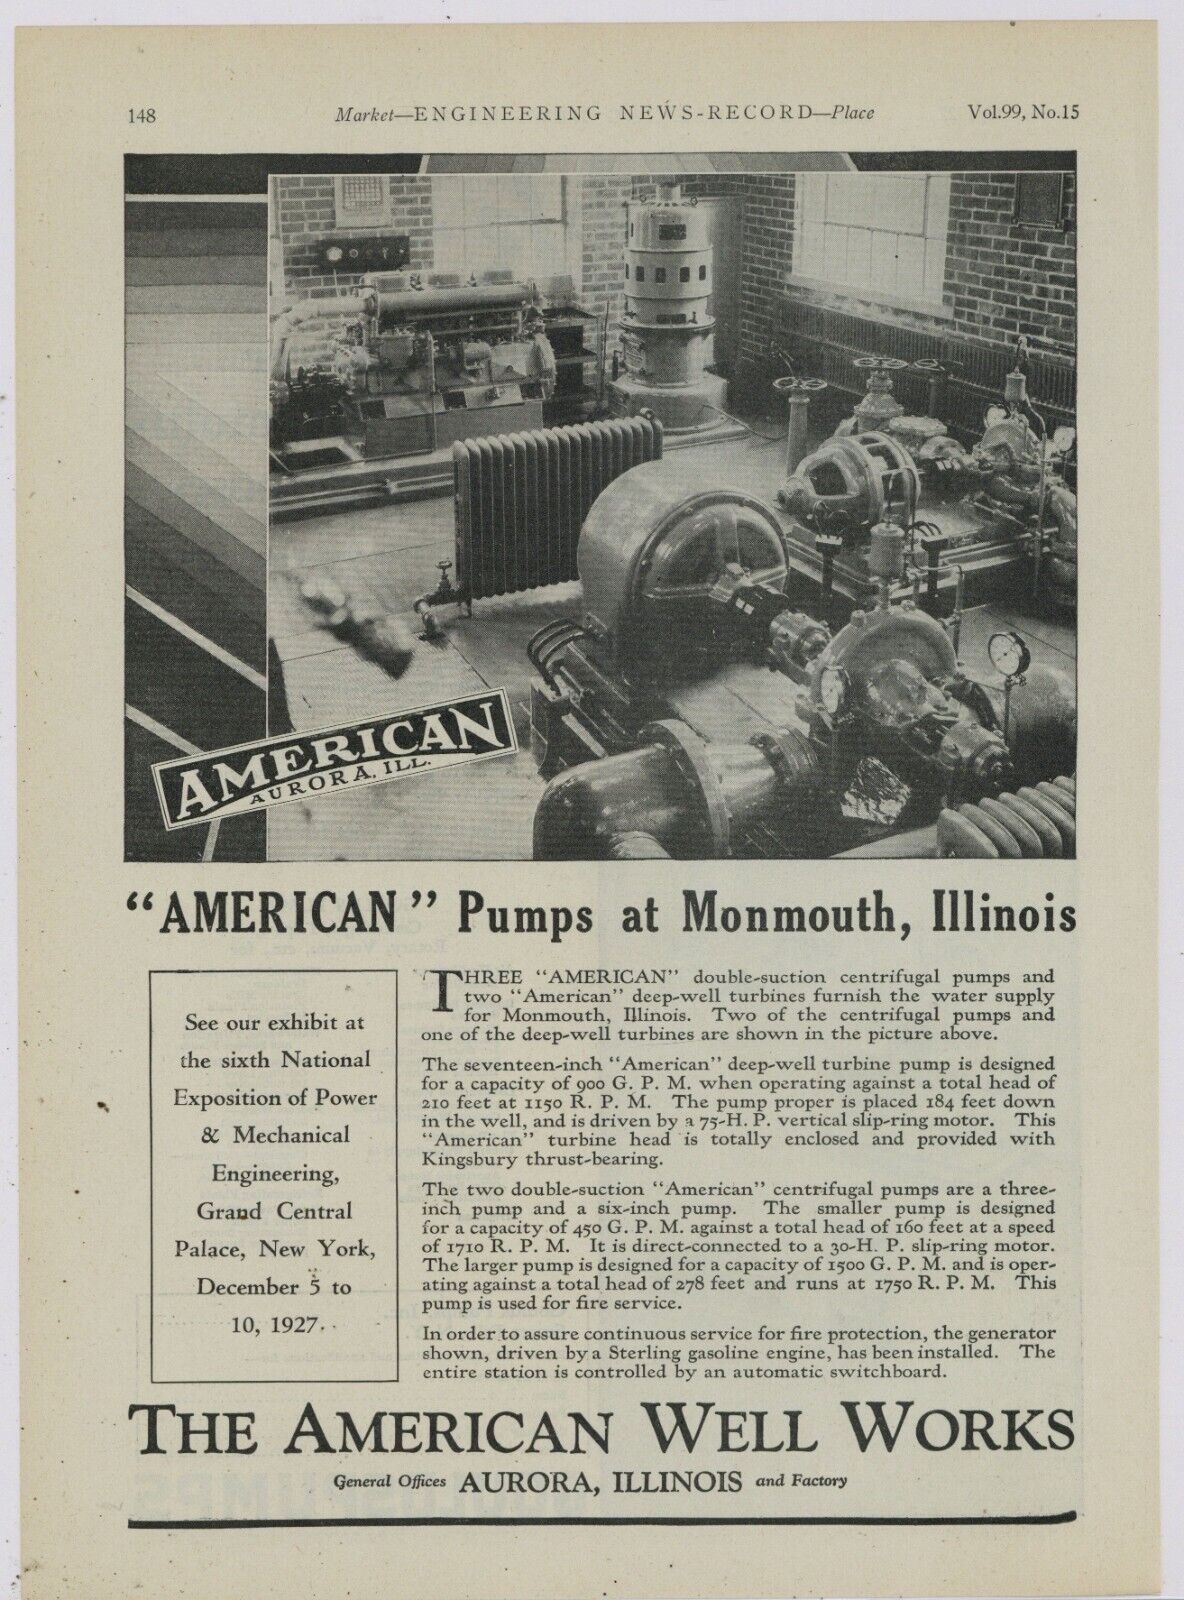 1927 American Well Works Ad: Deep Well Turbine Pump at Monmouth, Illinois Plant